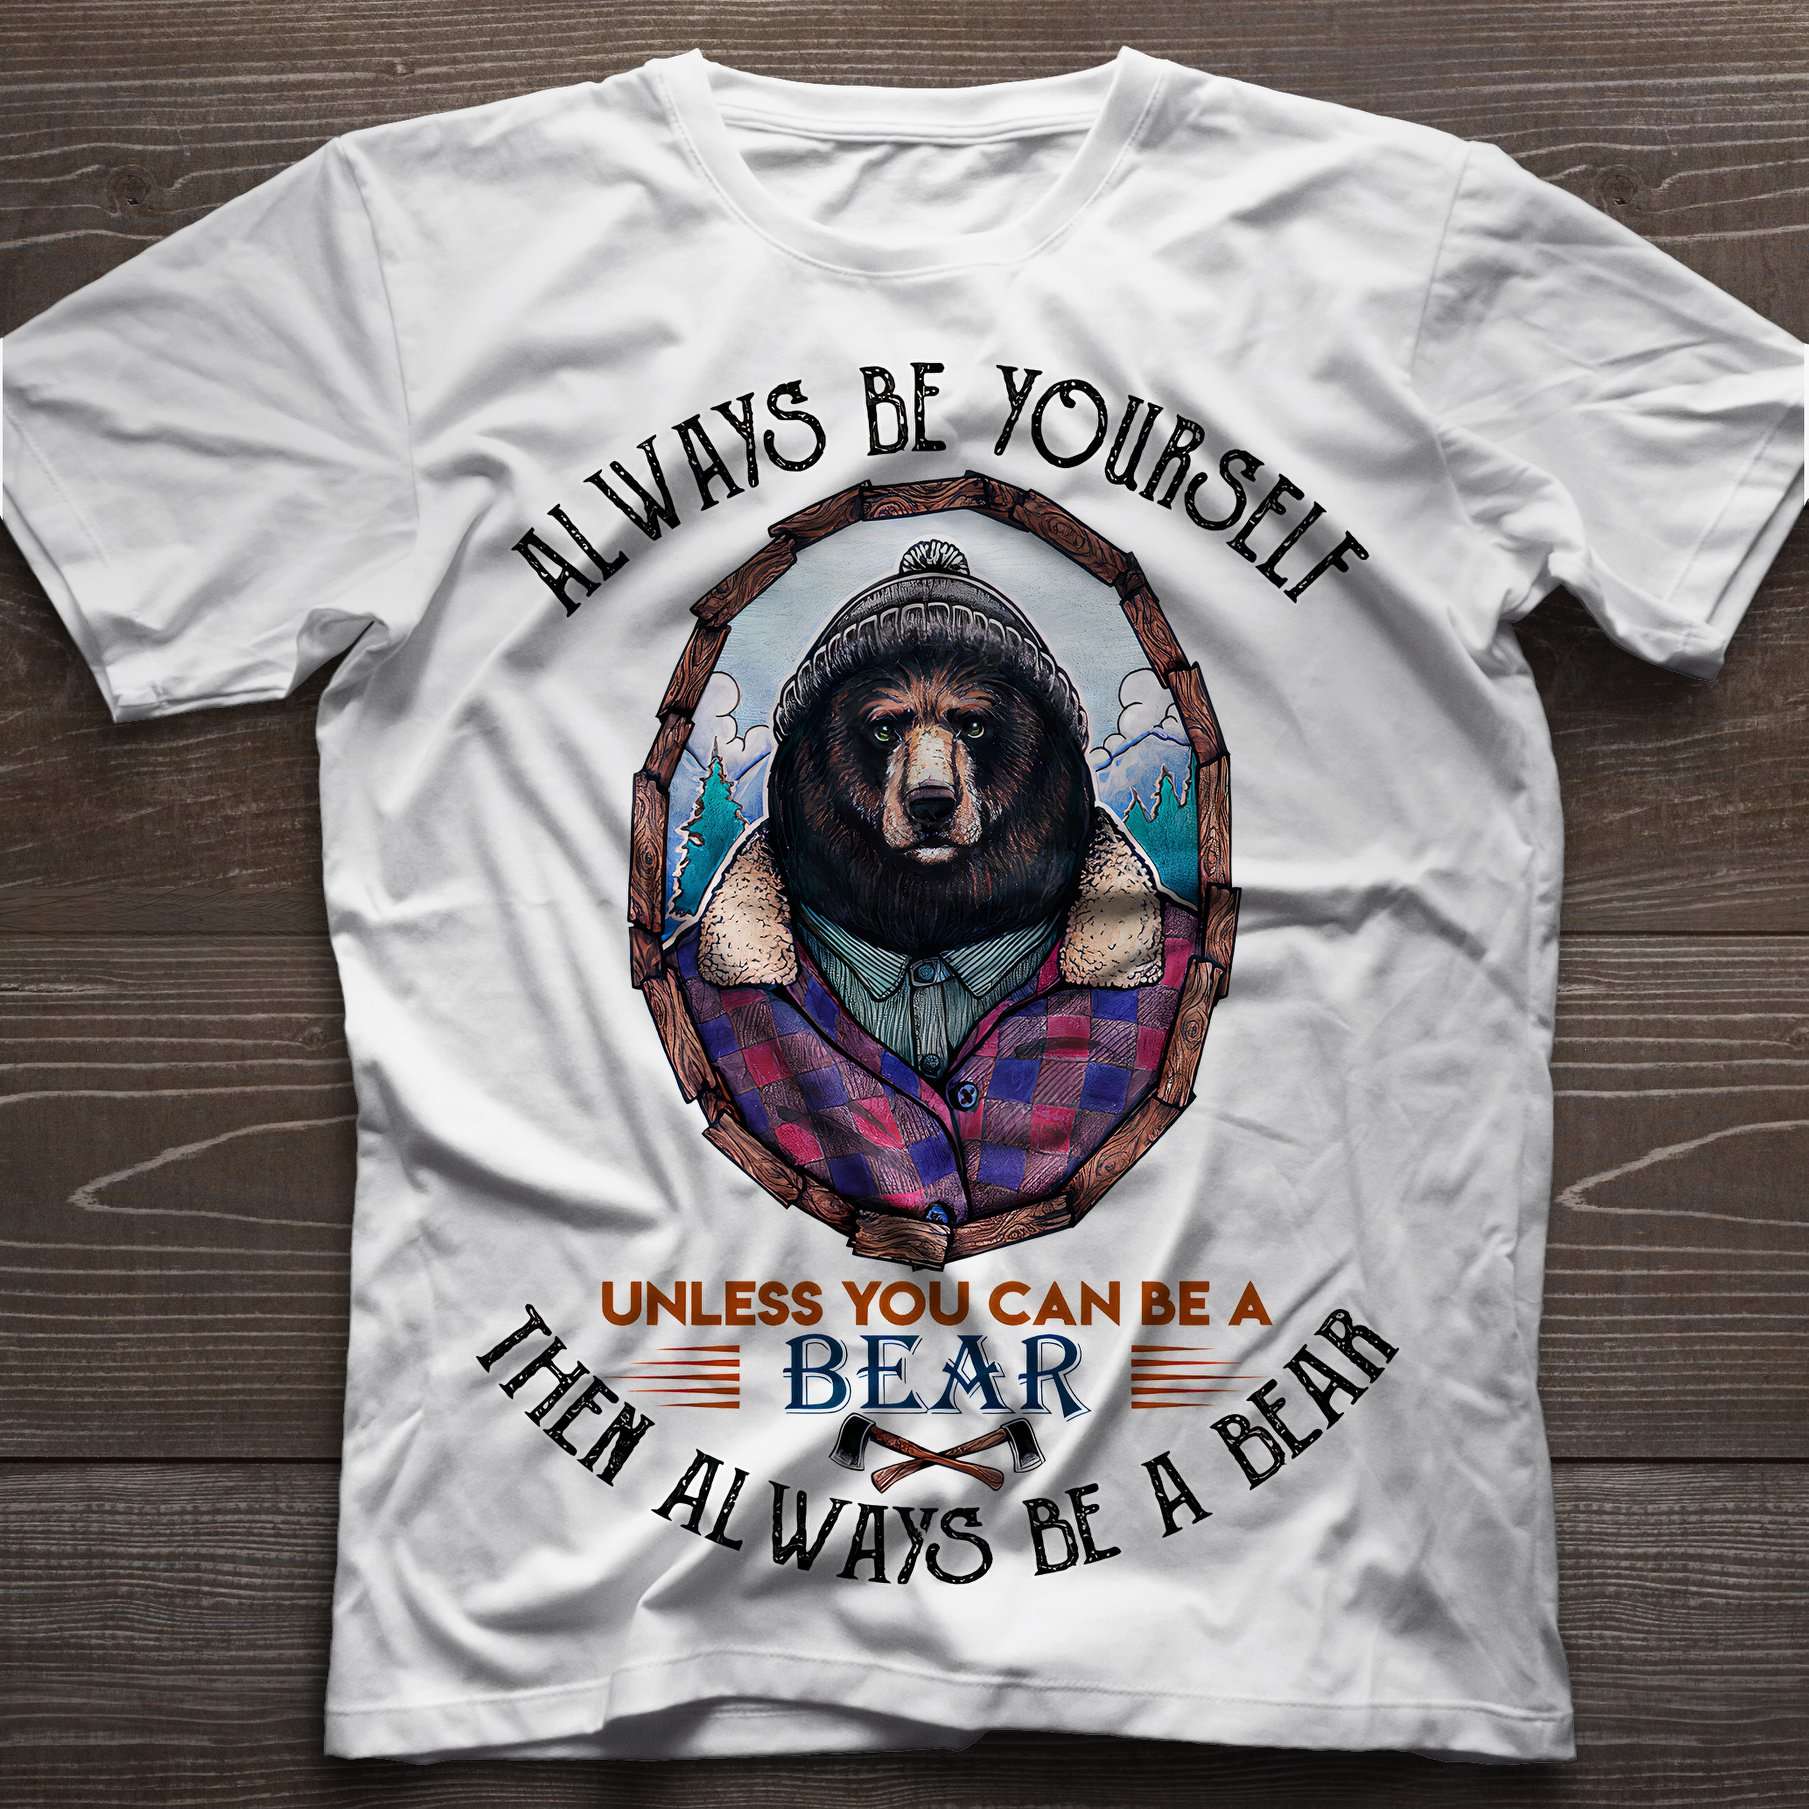 Bear Graphic T-shirt - Always be yourself unless you can be a bear then always be a bear